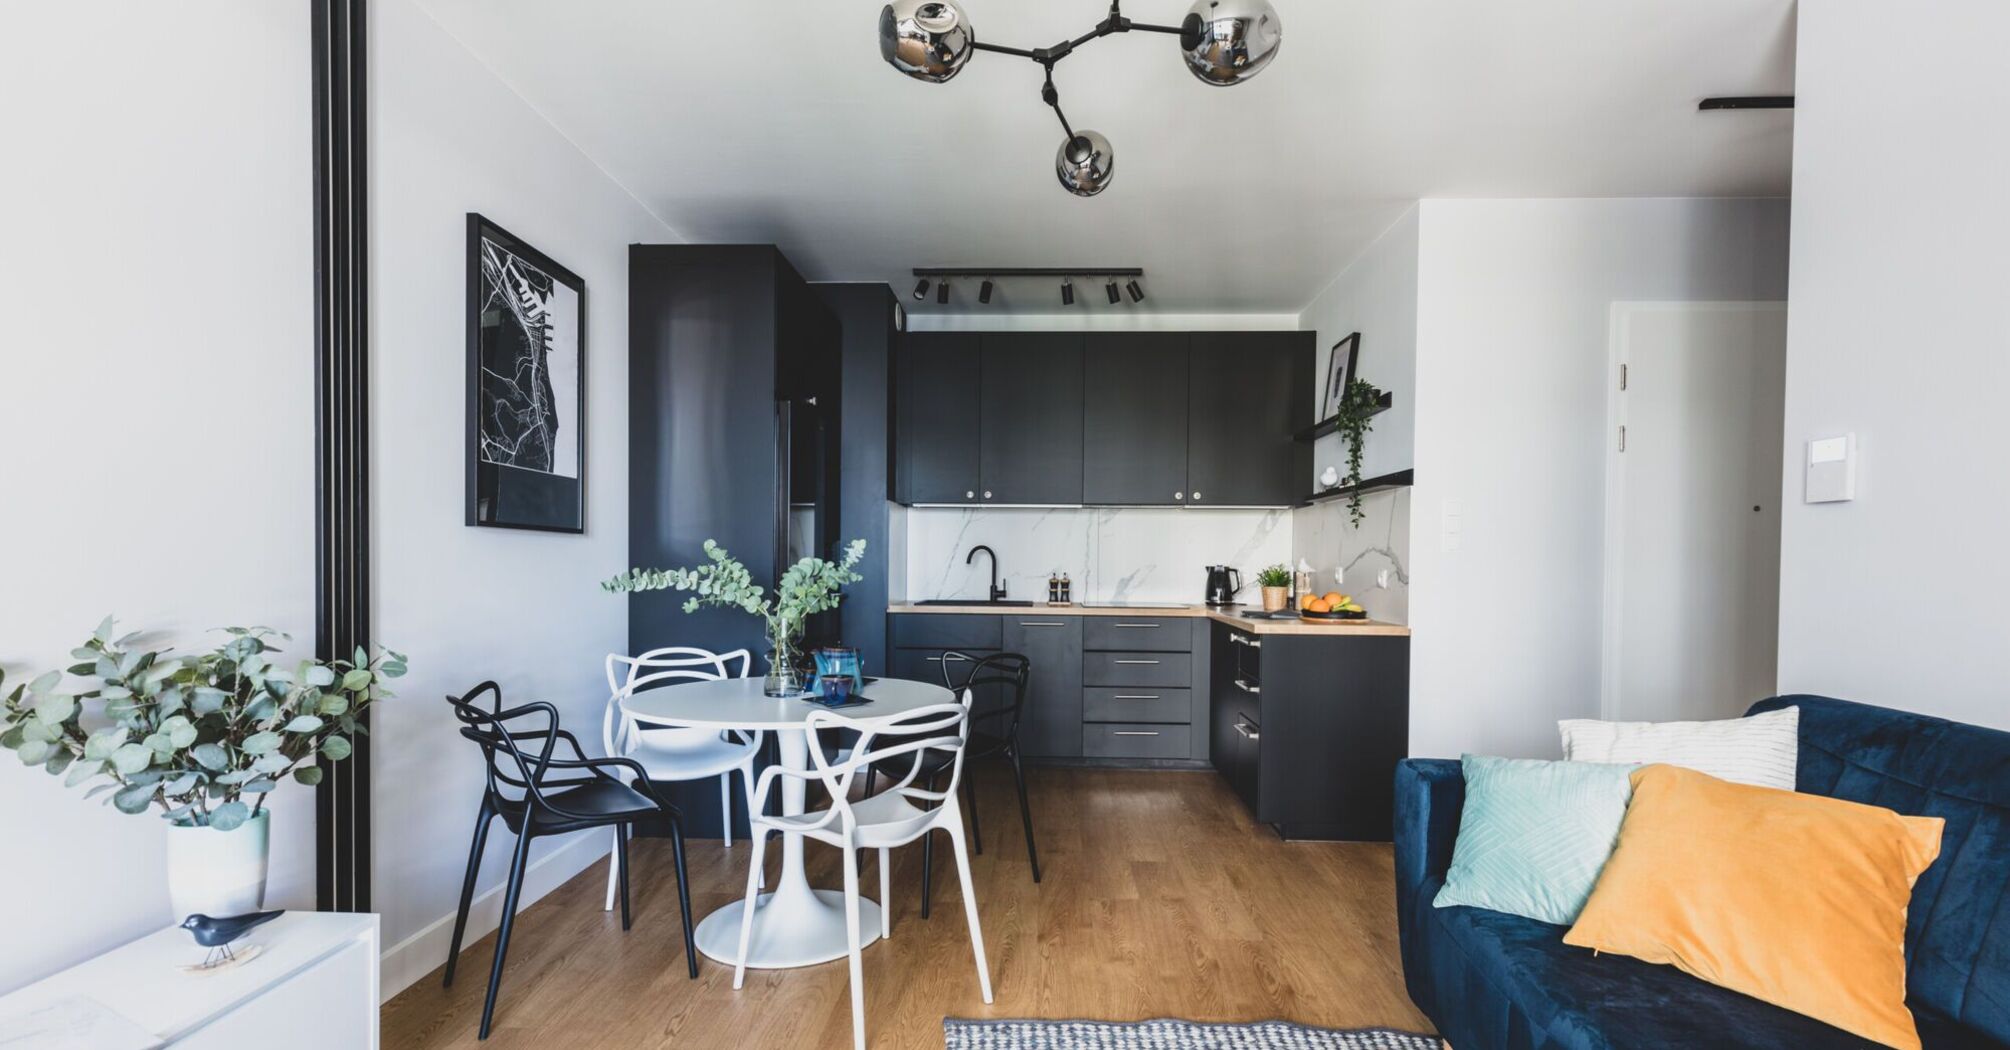 Pros and cons of living in a studio apartment